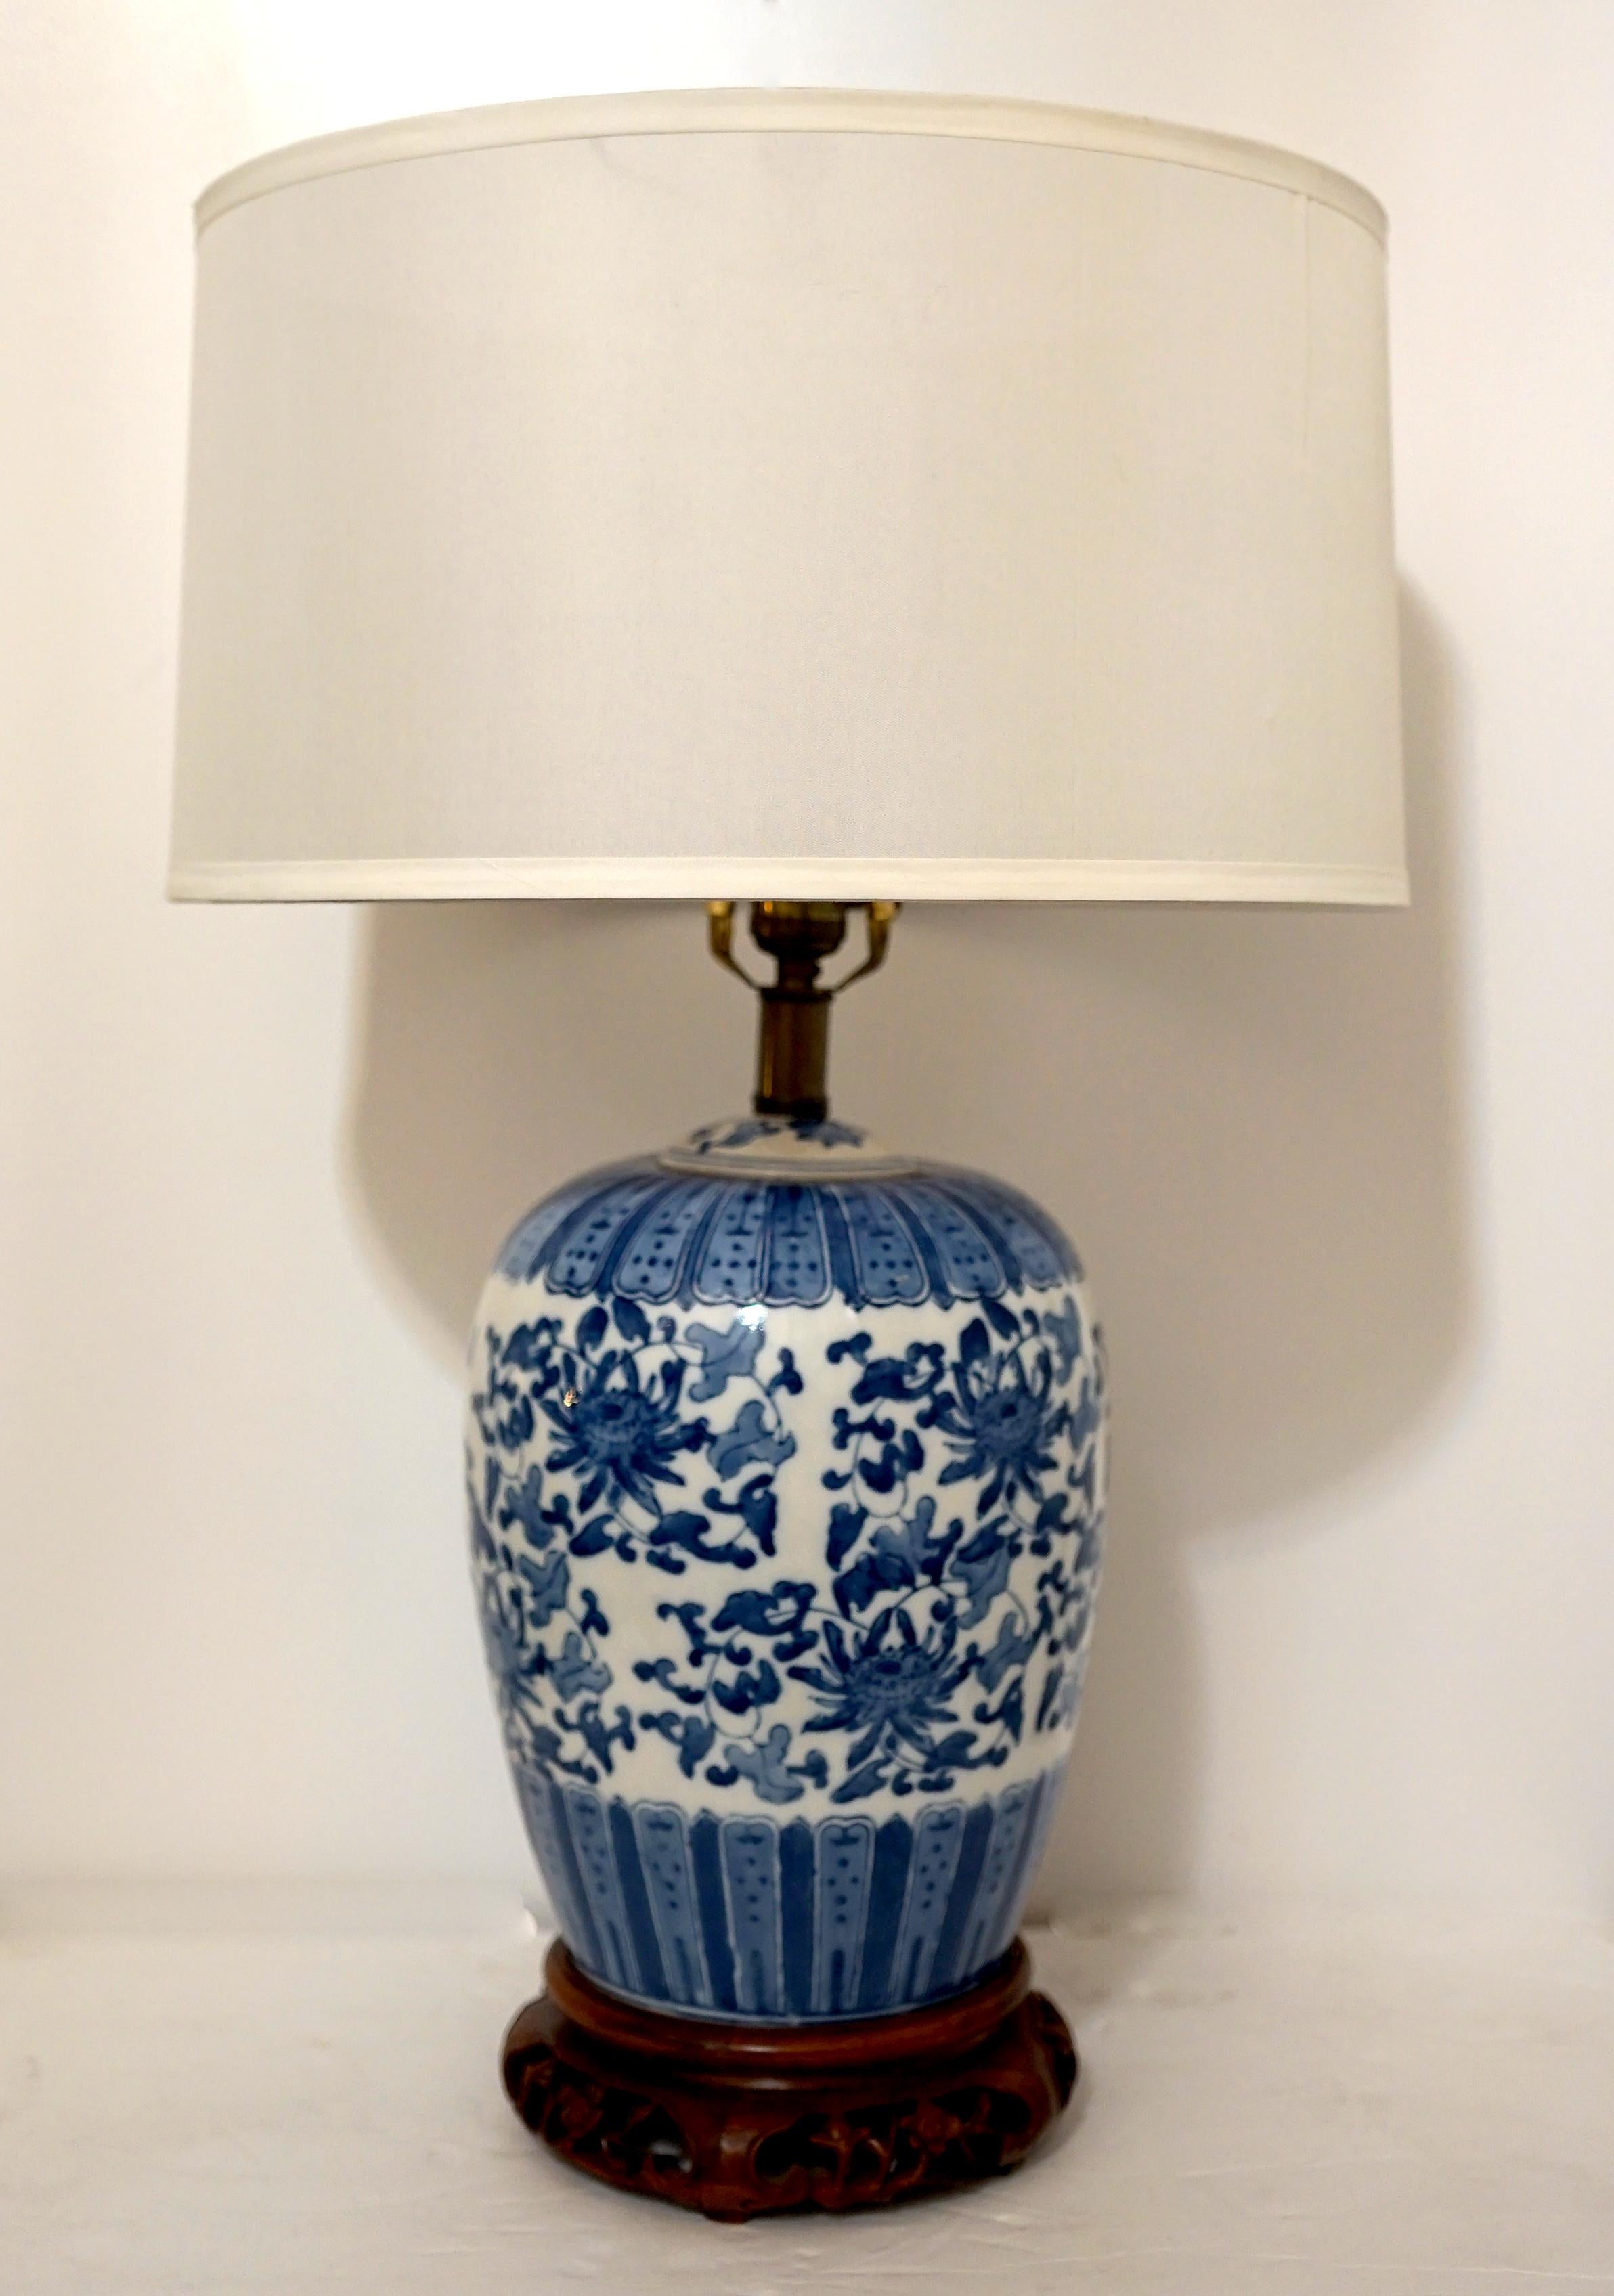 The beautiful richly colored rosewood base contrasting the porcelain hand-painted vintage lamp makes it a standout. This Chinese export vintage lamp has its original blue and white finial. And, the price is right for this collectible table lamp.